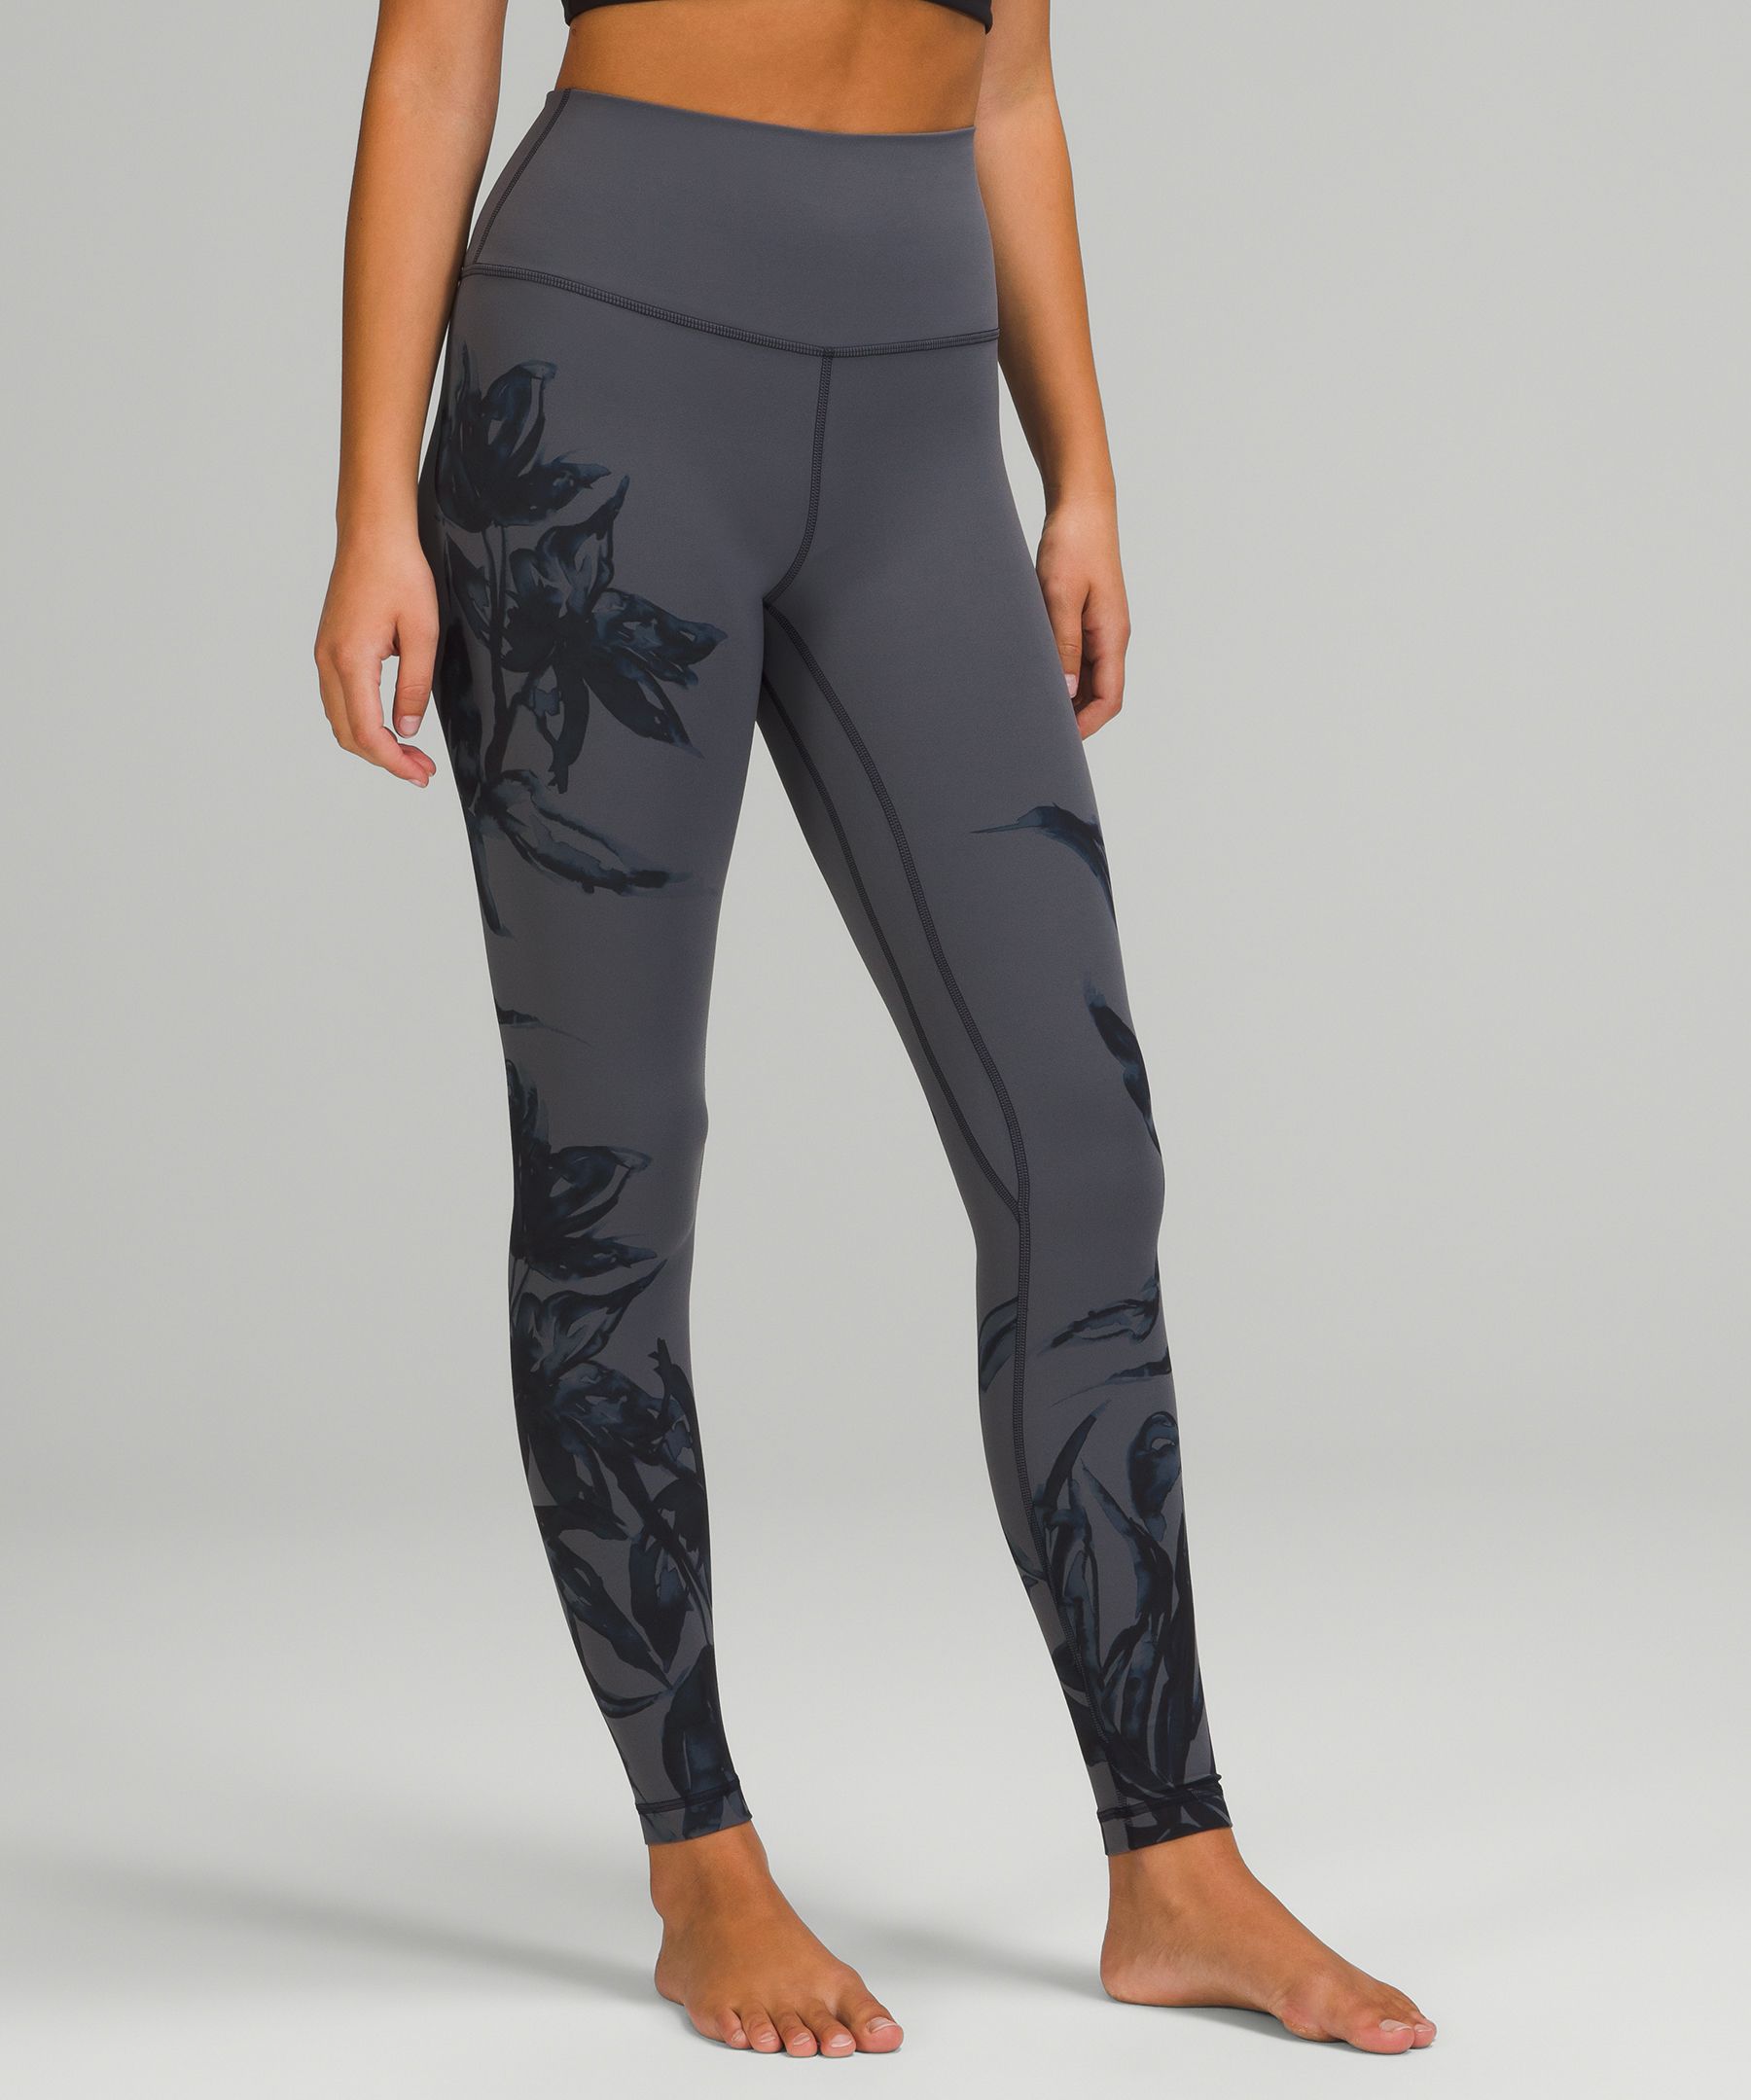 lululemon align high-rise pant 28” in cassis color!